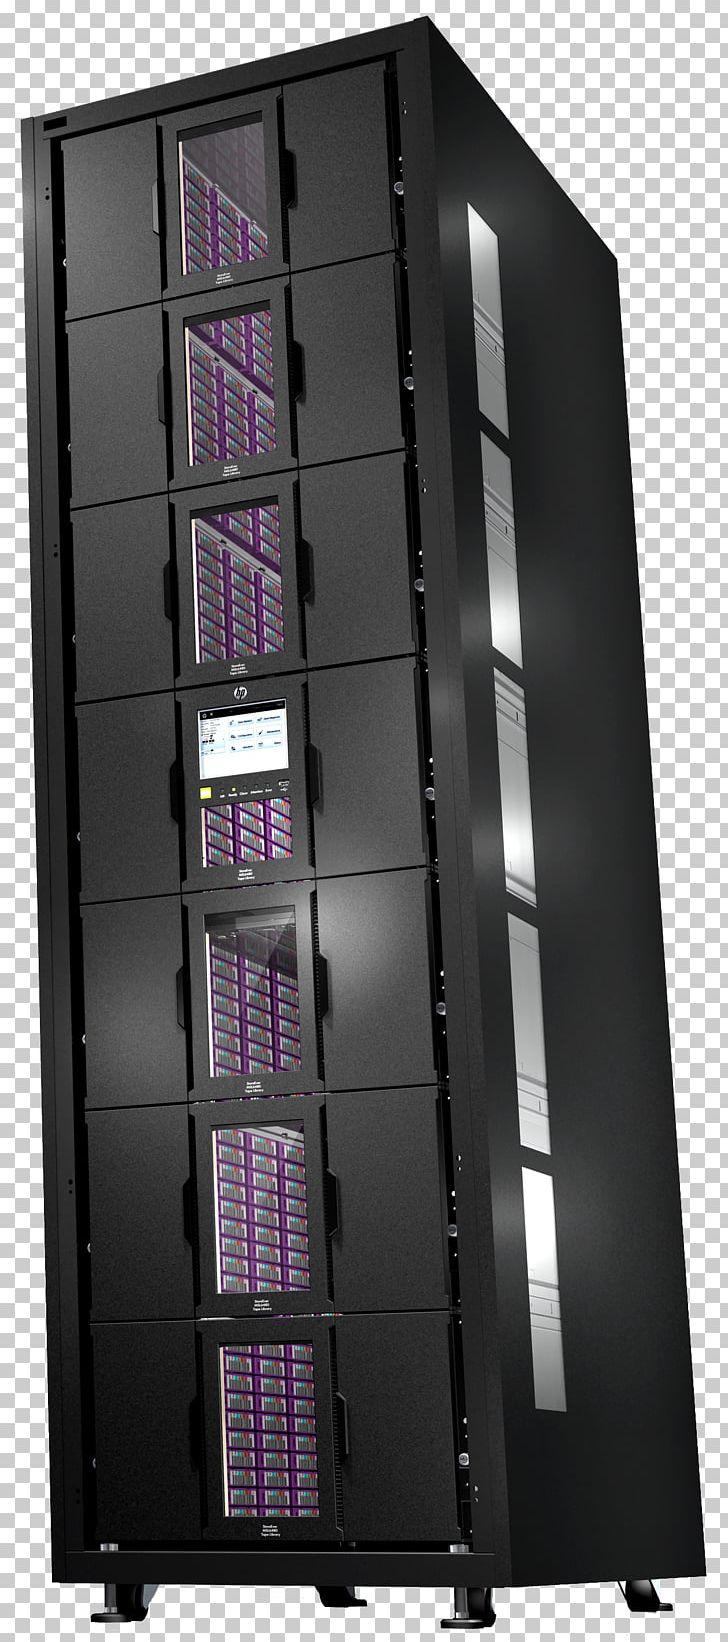 Computer Cases & Housings Disk Array Computer Servers Computer Cluster PNG, Clipart, Array, Computer, Computer Case, Computer Cases Housings, Computer Cluster Free PNG Download